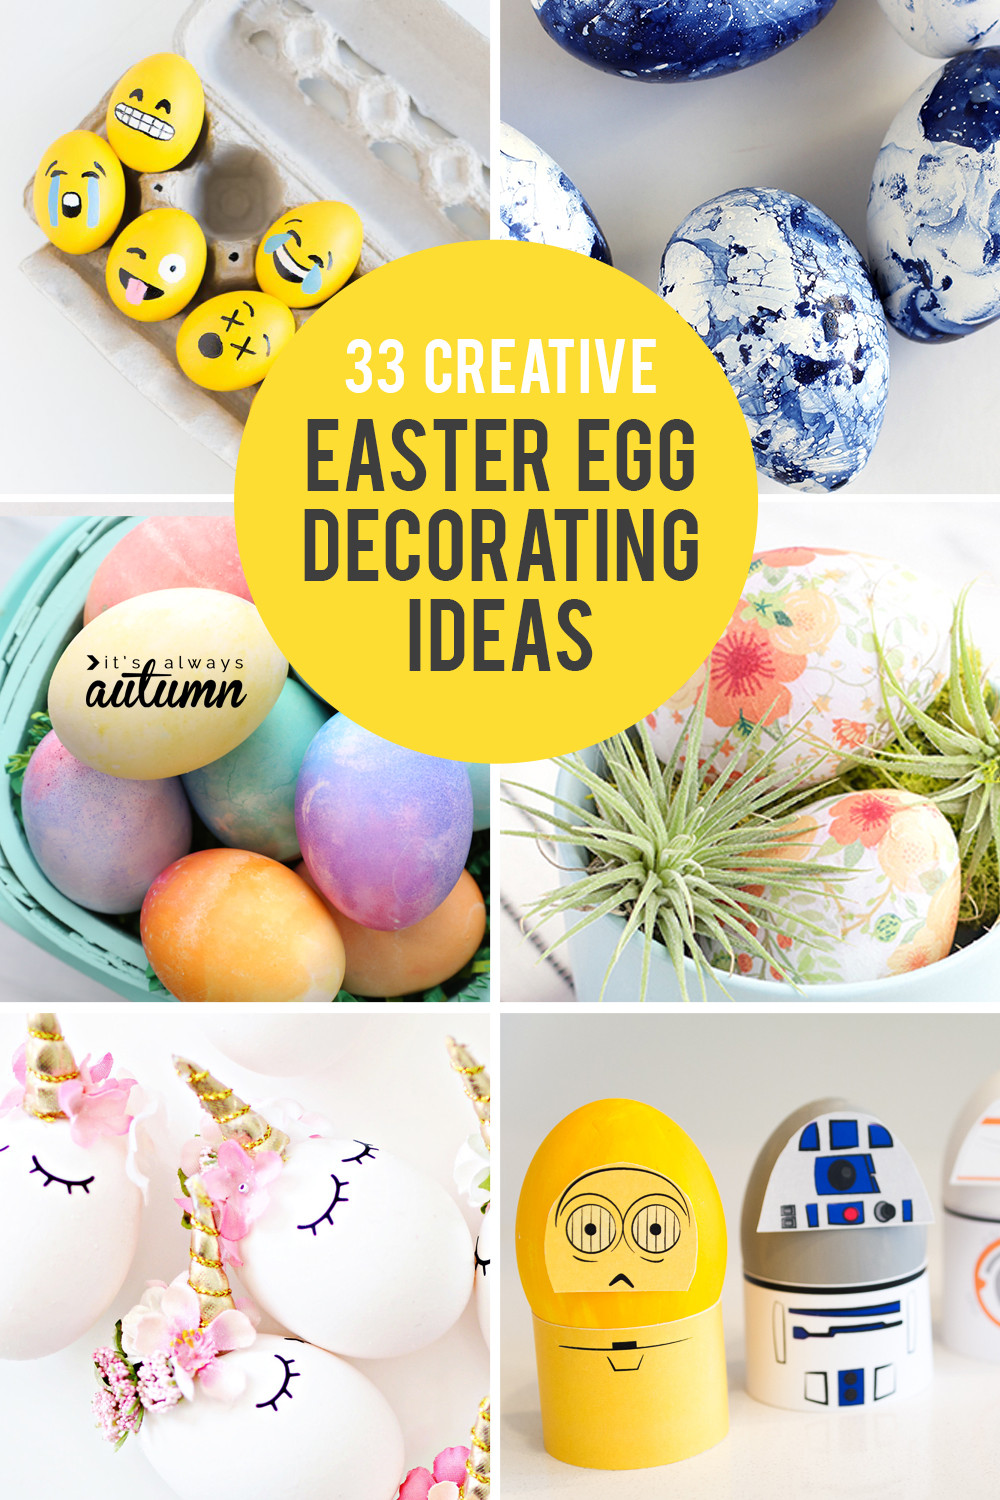 Easter Egg Decorating Ideas
 33 AMAZING egg decorating ideas for Easter ditch the dye